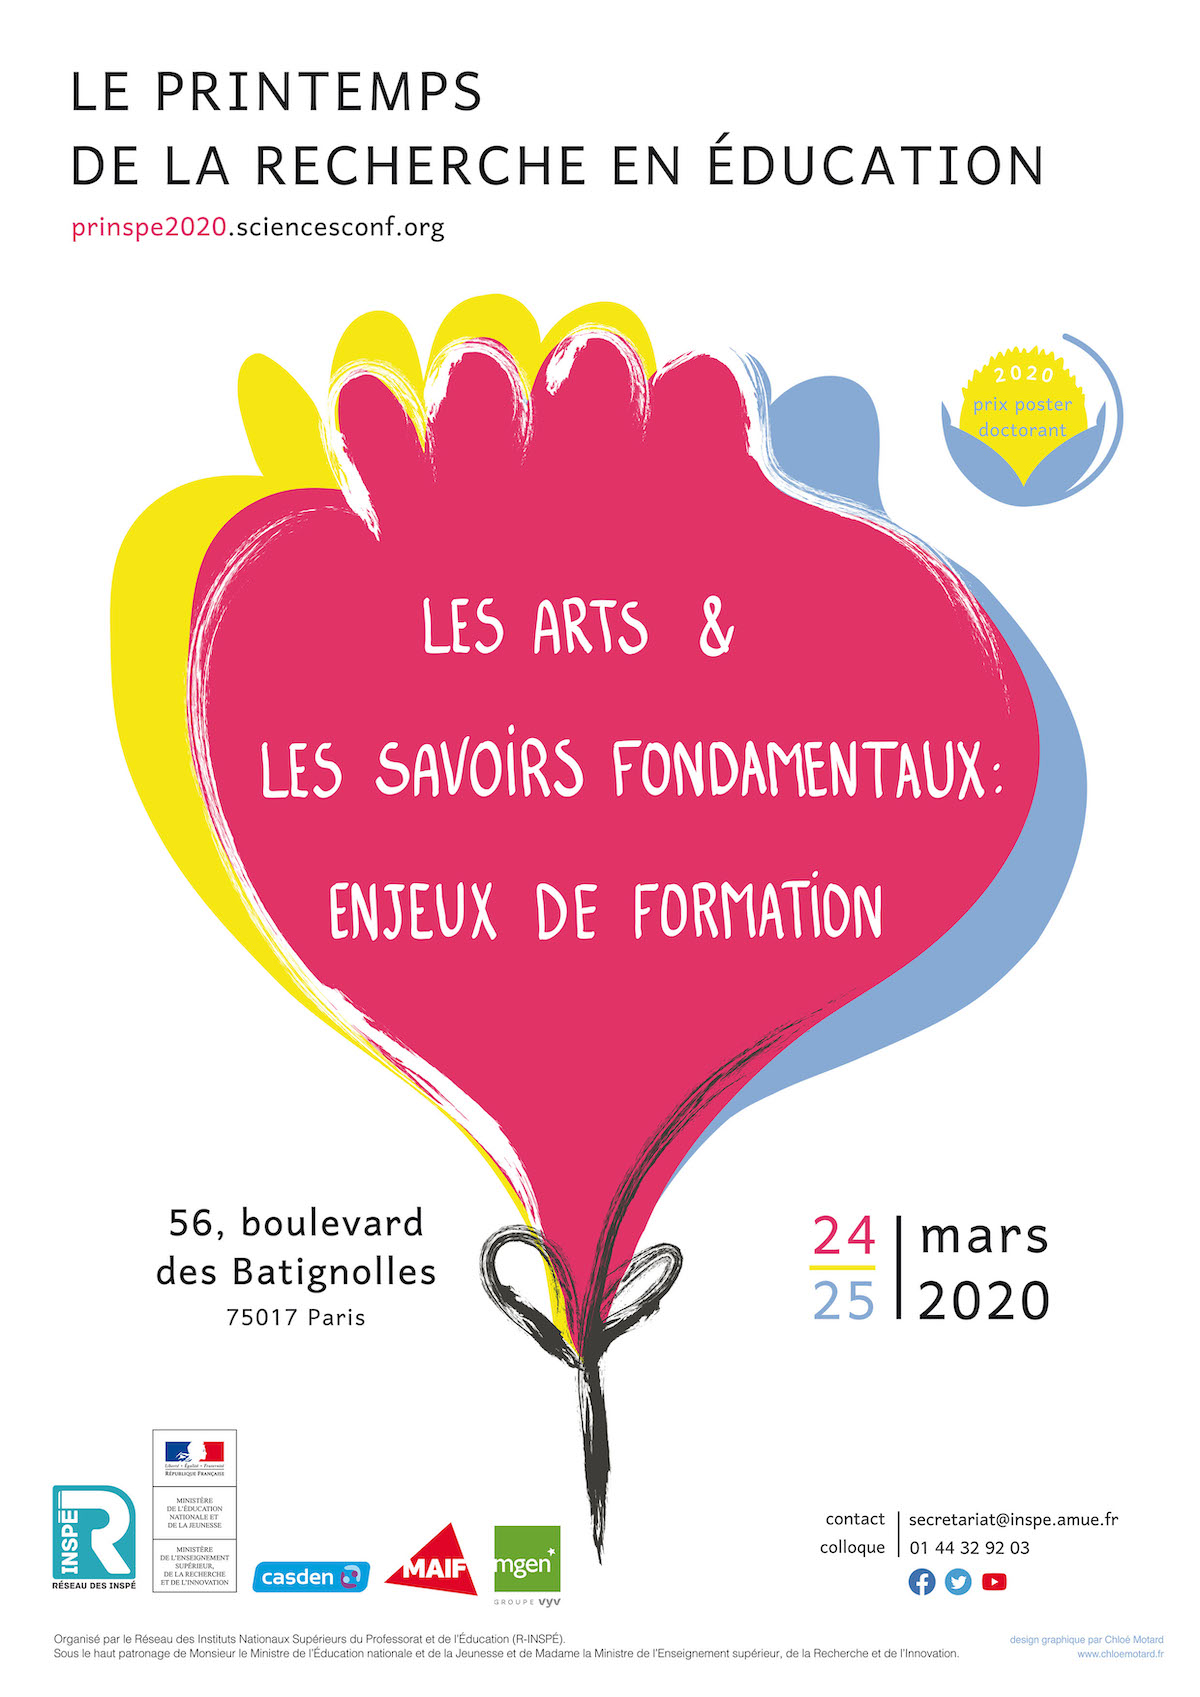 poster for the research conference "Les Arts et les Savoirs Fondamentaux: Enjeux de Formation". With a big flower-bud in the center, in magenta, yellow and blue.